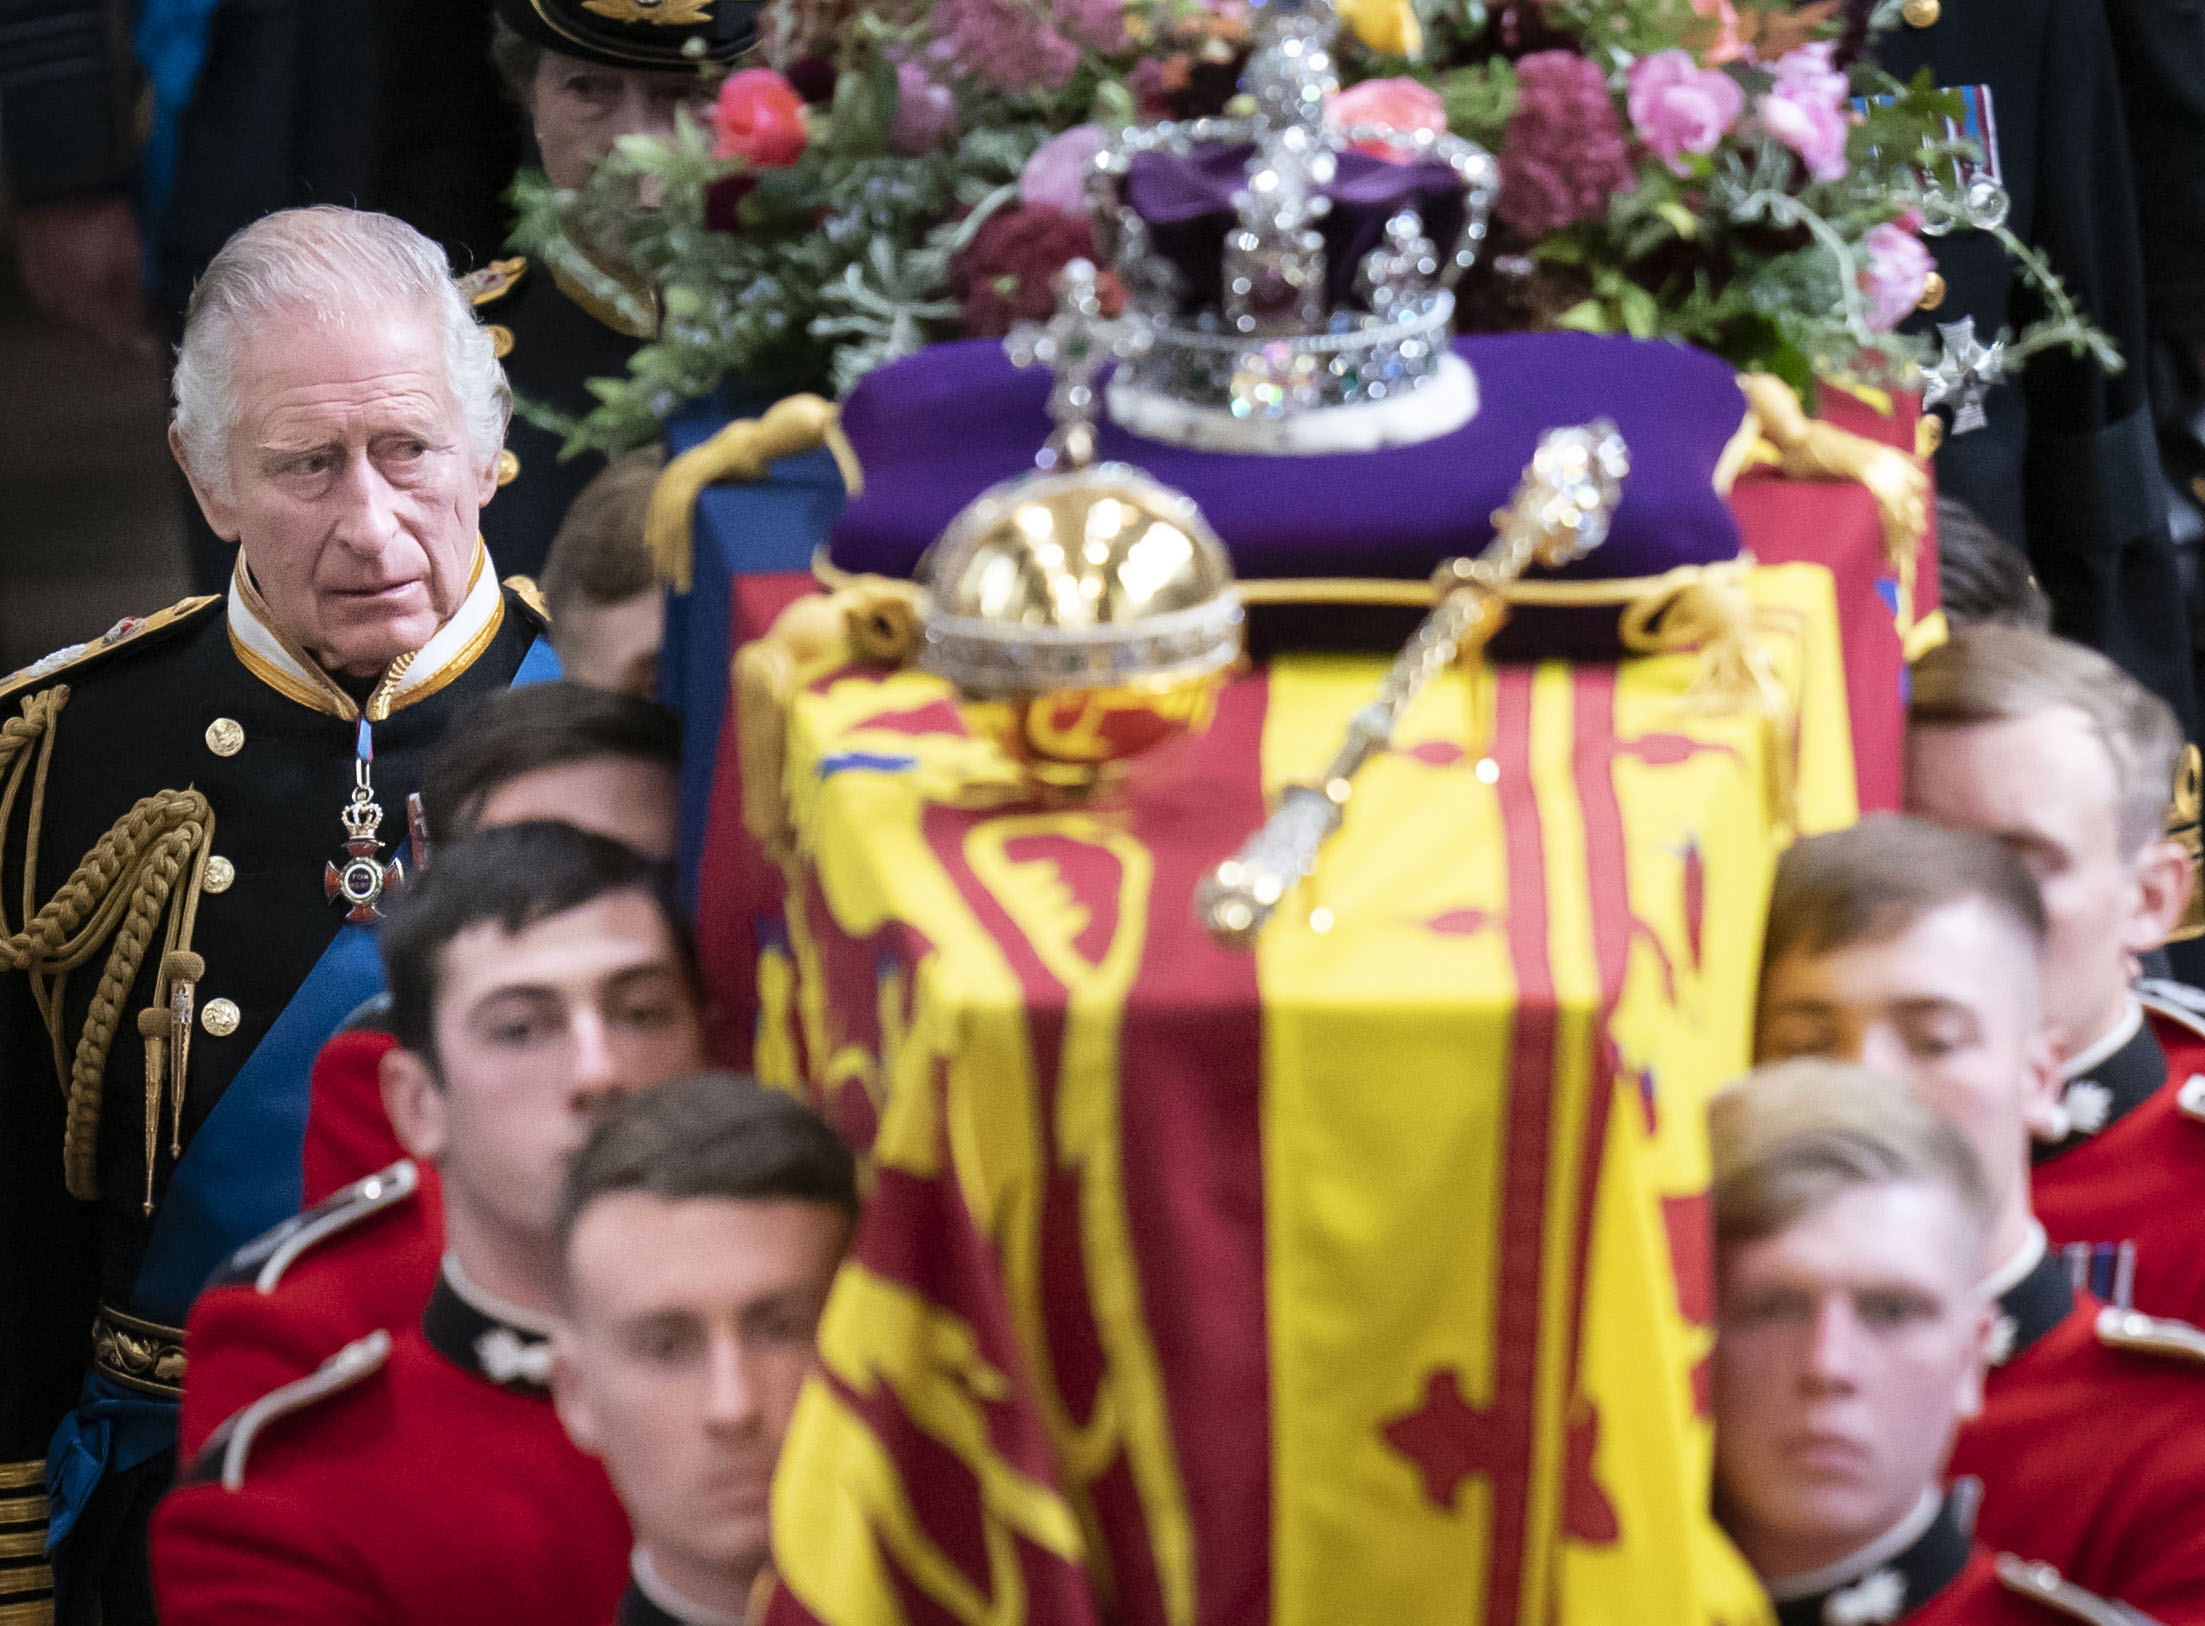 King Charles III and members of the royal family follow behind the coffin of Queen Elizabeth II as it is carried out of Westminster Abbey after her State Funeral in London, England, on September 19, 2022. | Source: Getty Images